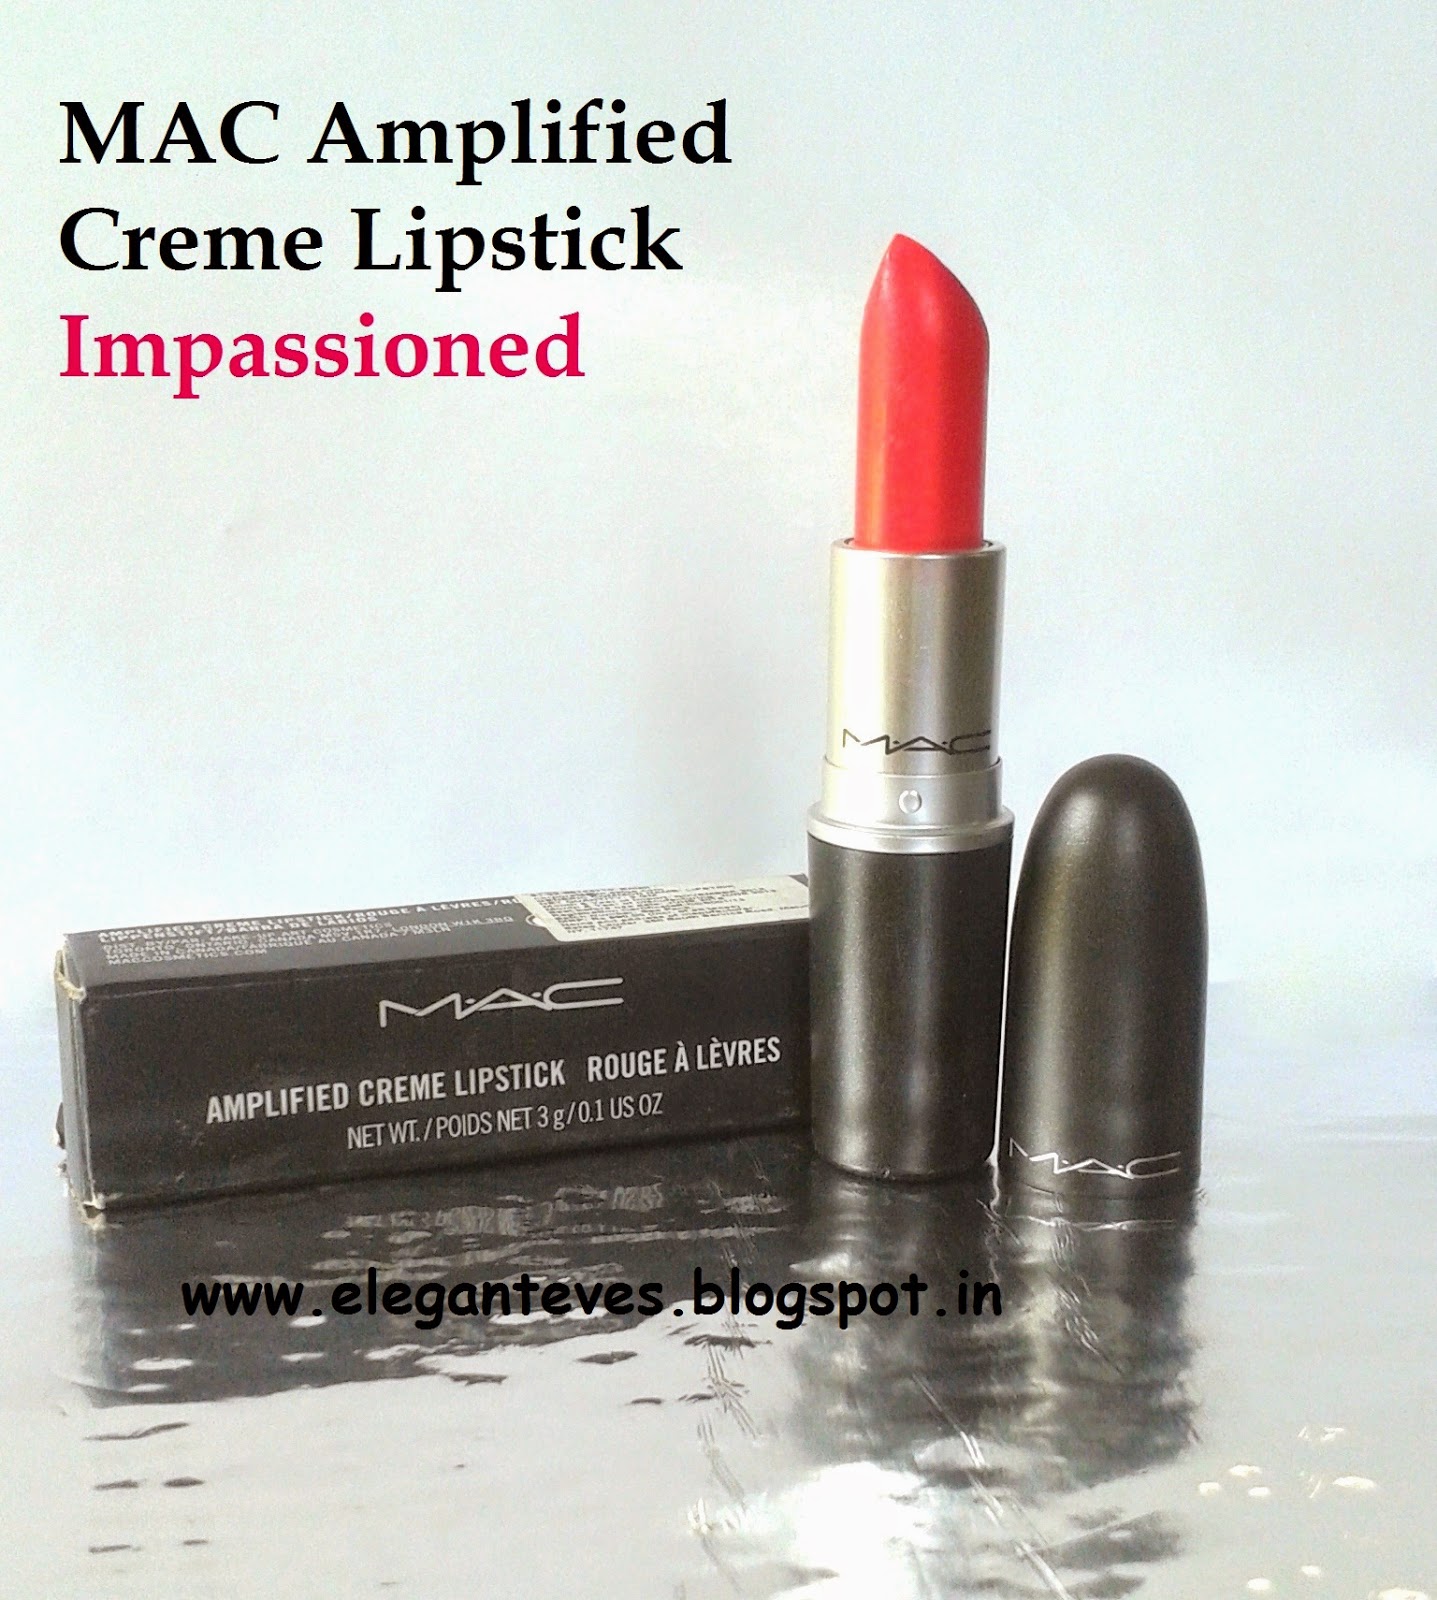 REVIEW, SWATCHES, LOTD OF MAC AMPLIFIED CREME LIPSTICK "IMPASSIONED"